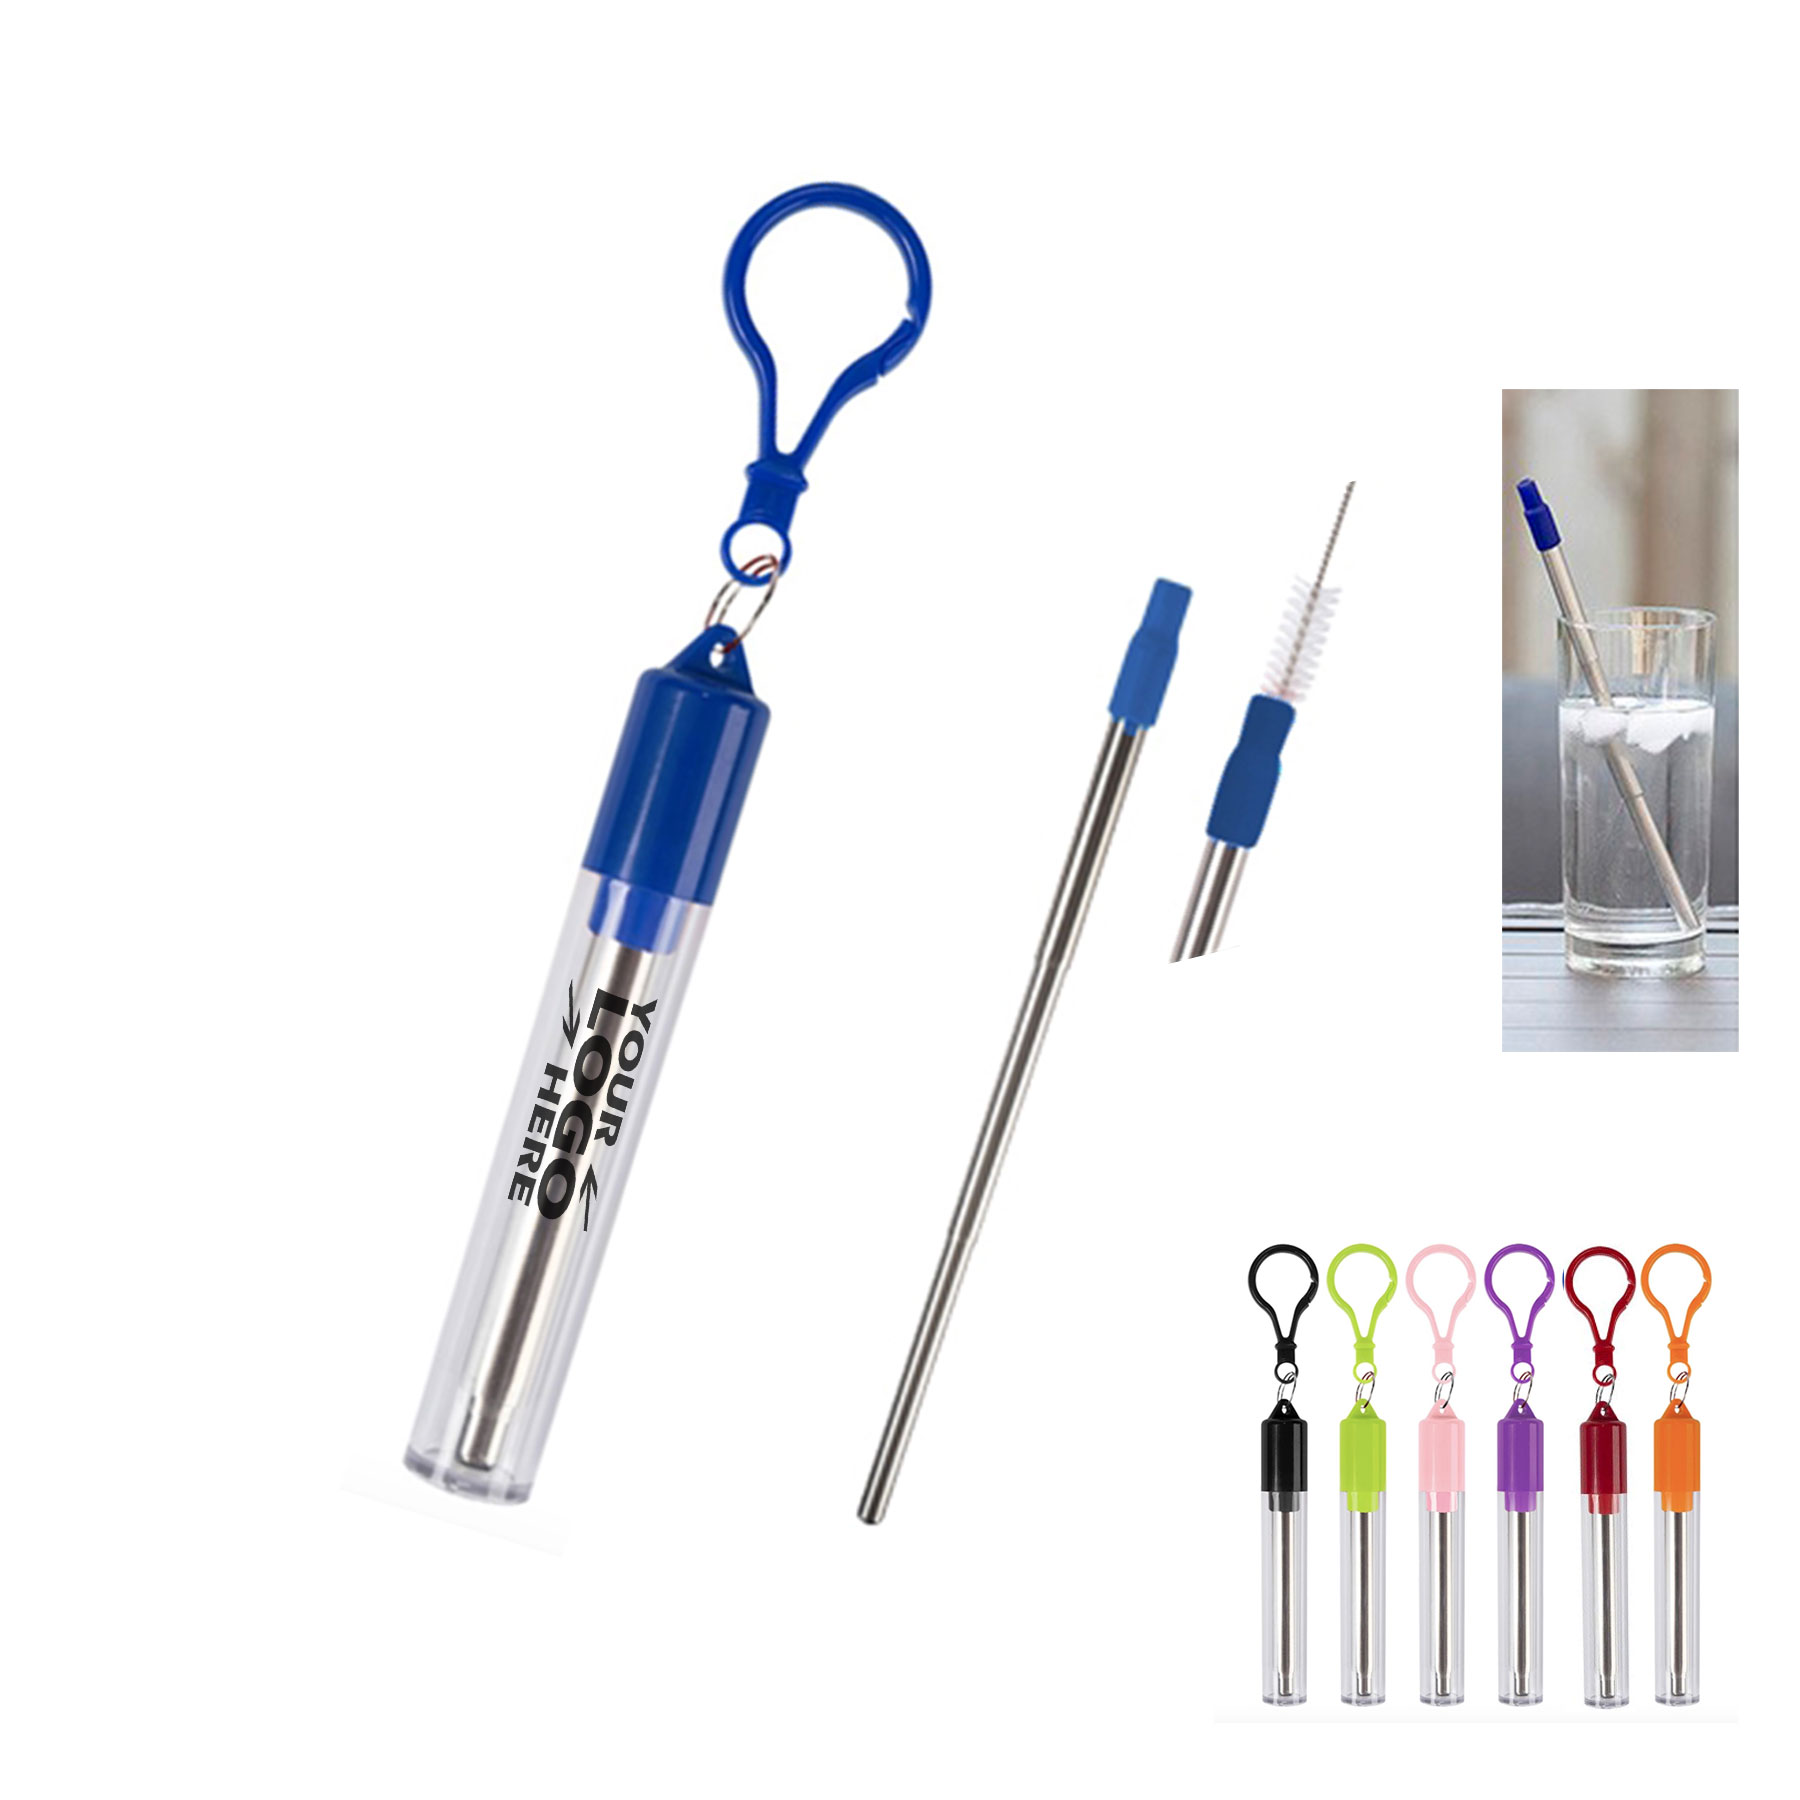 GL-GYT1026 Collapsible Stainless Steel Straw Kit